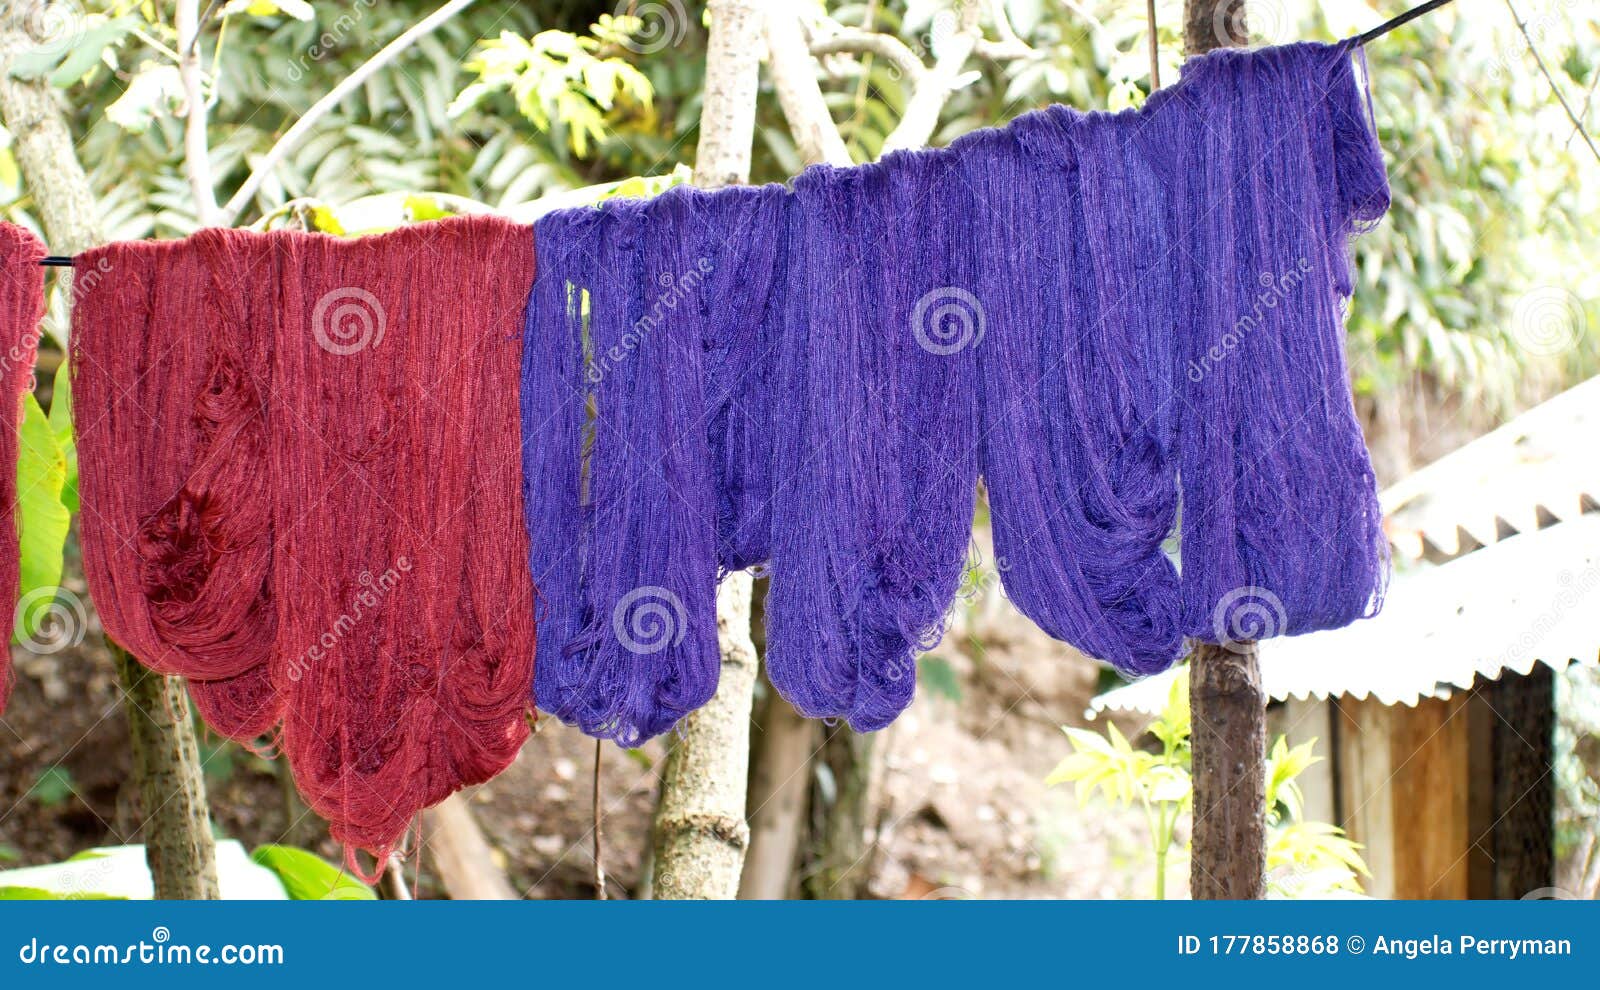 dyed thread hanging to dry